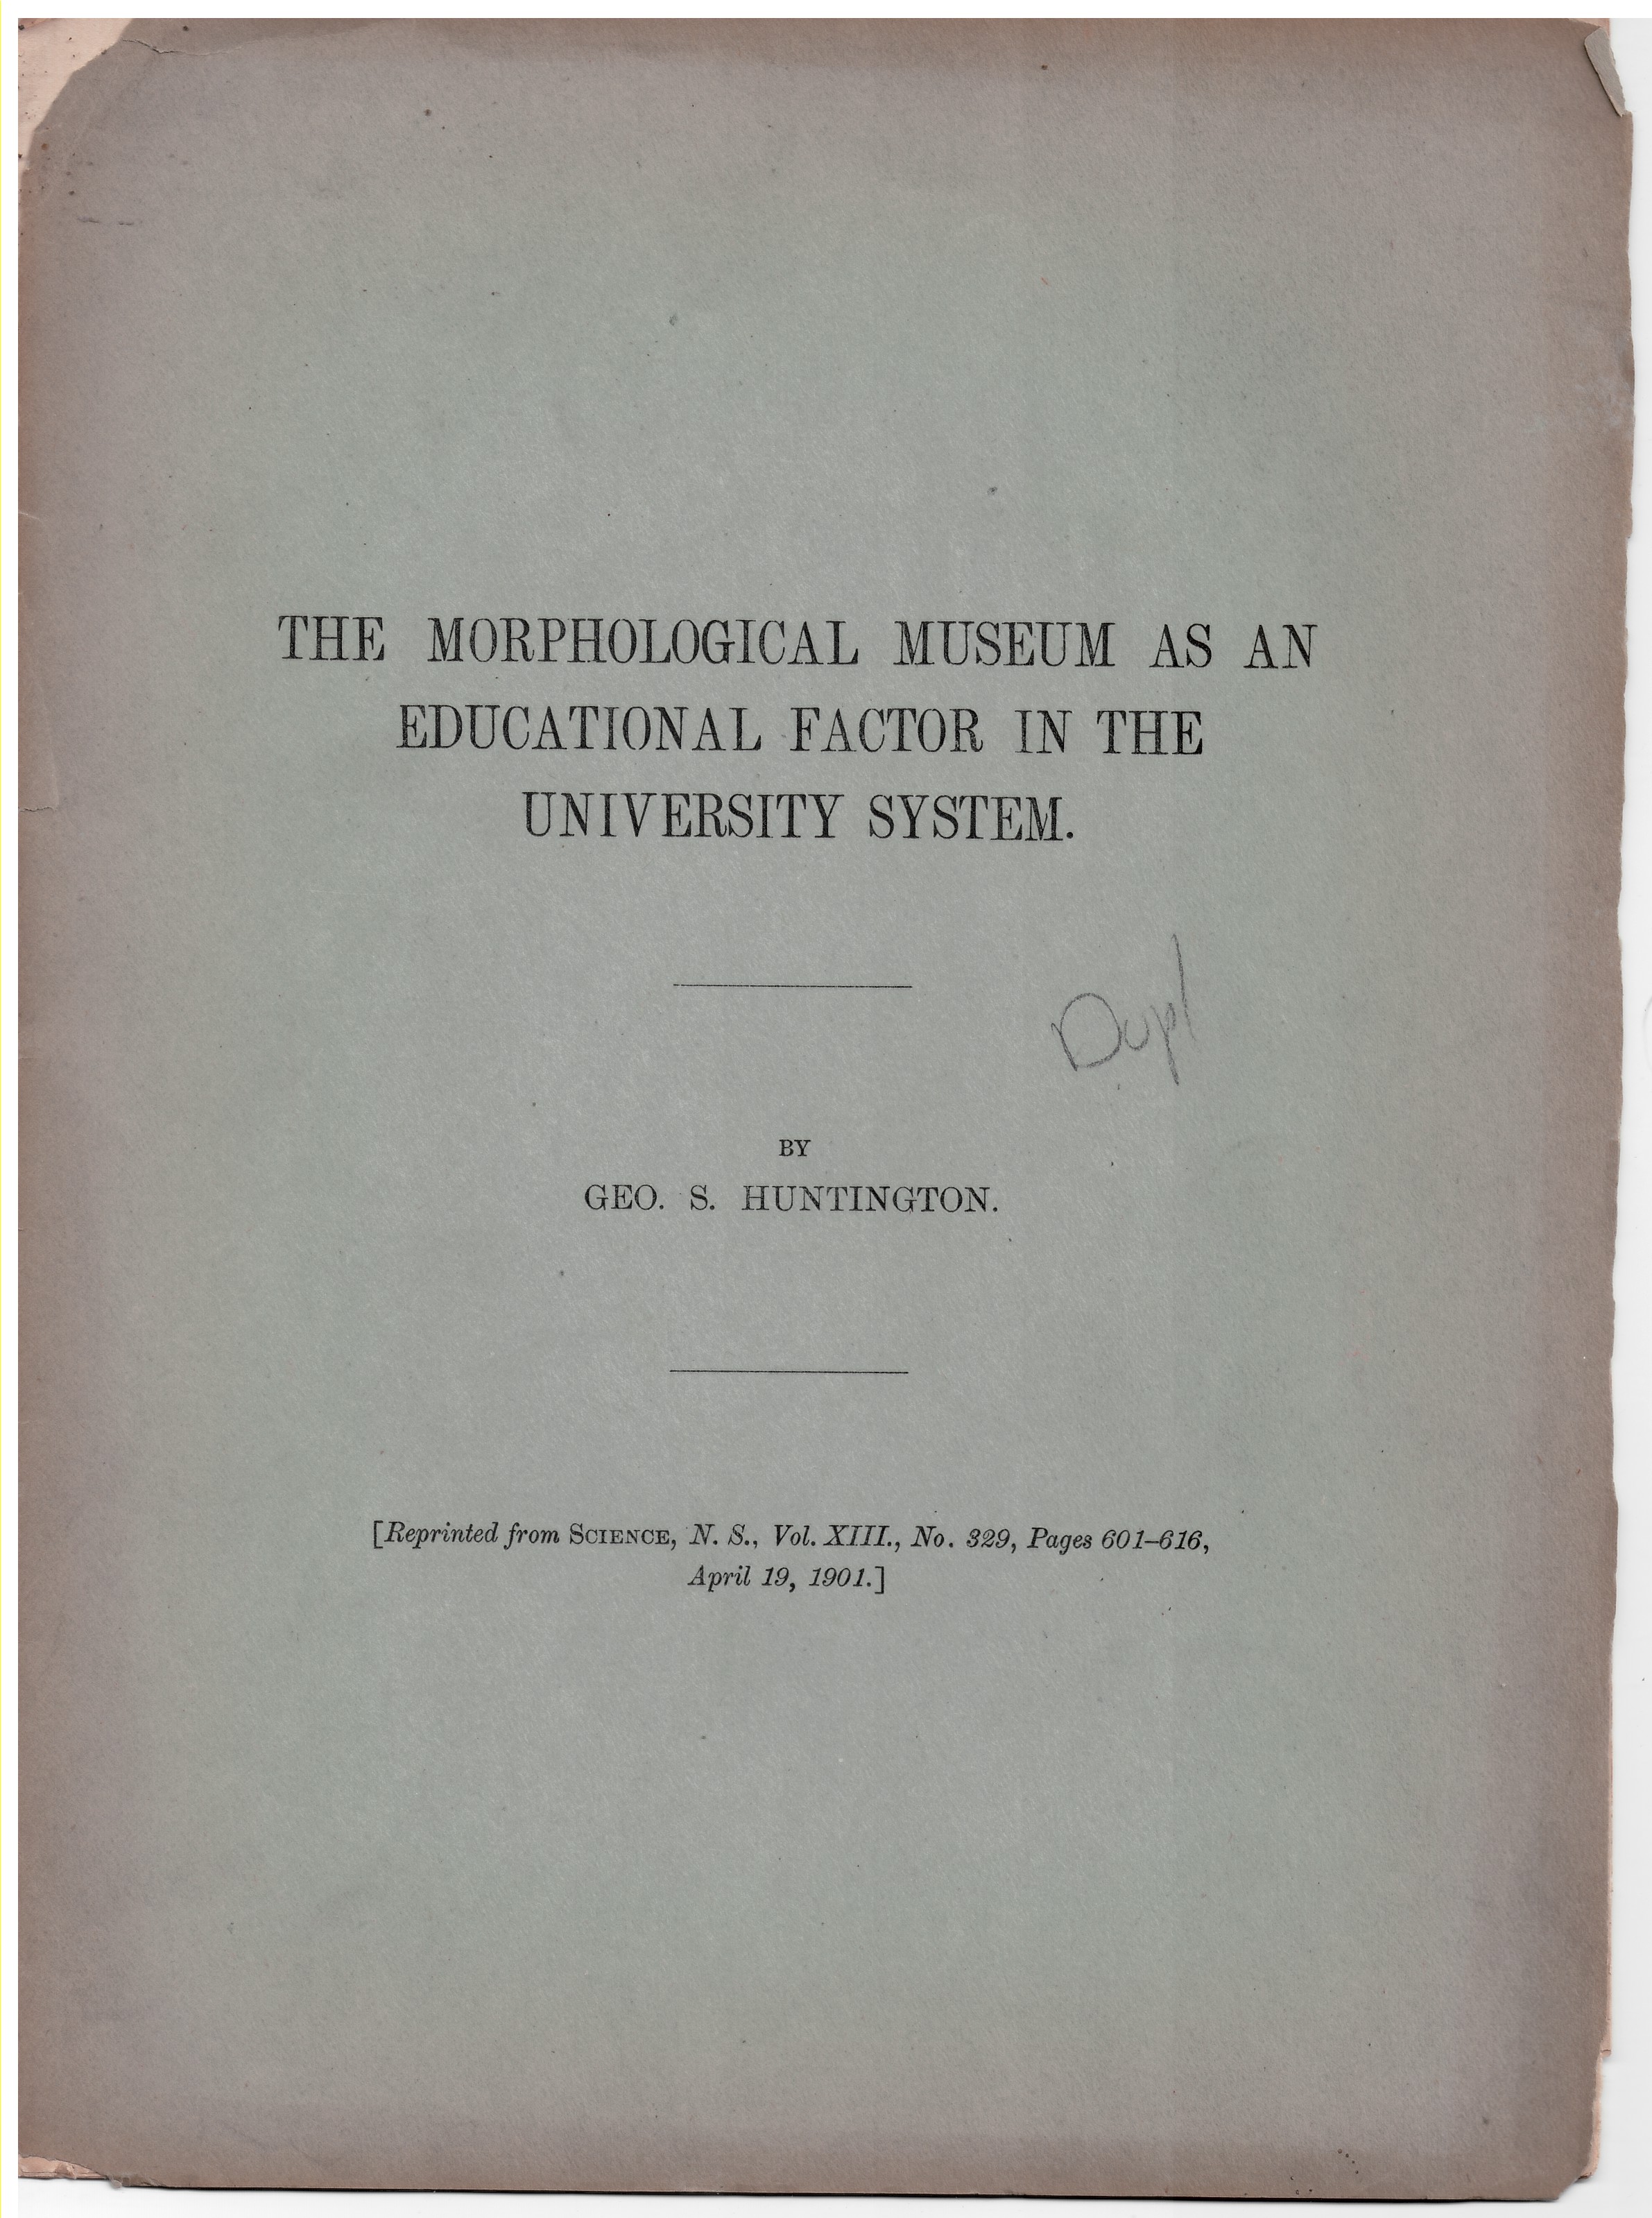 HUNTINGTON, GEO. S. - The Morphological Museum As an Education Factor in the University System. Offprint from Science, New Series, Vol. XIII, No. 329, Pages 601-616, April 19, 1901.